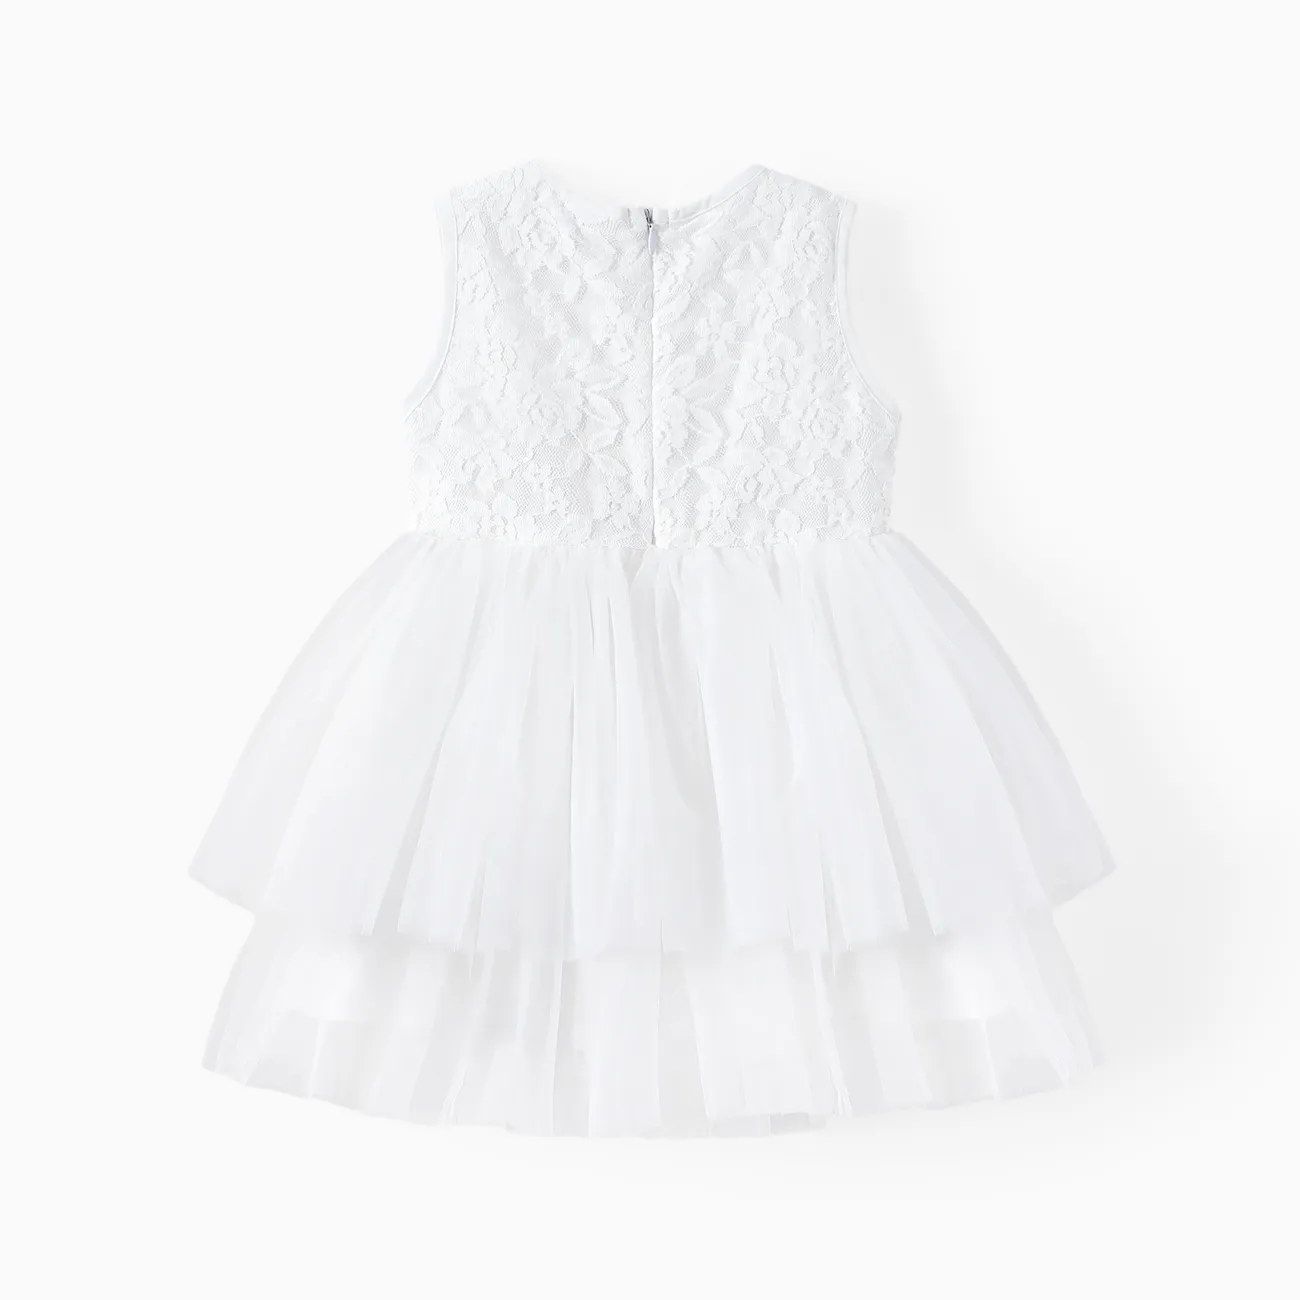 Toddler Girl Double-layered Mesh Floral Lace Tulle Dress White big image 1